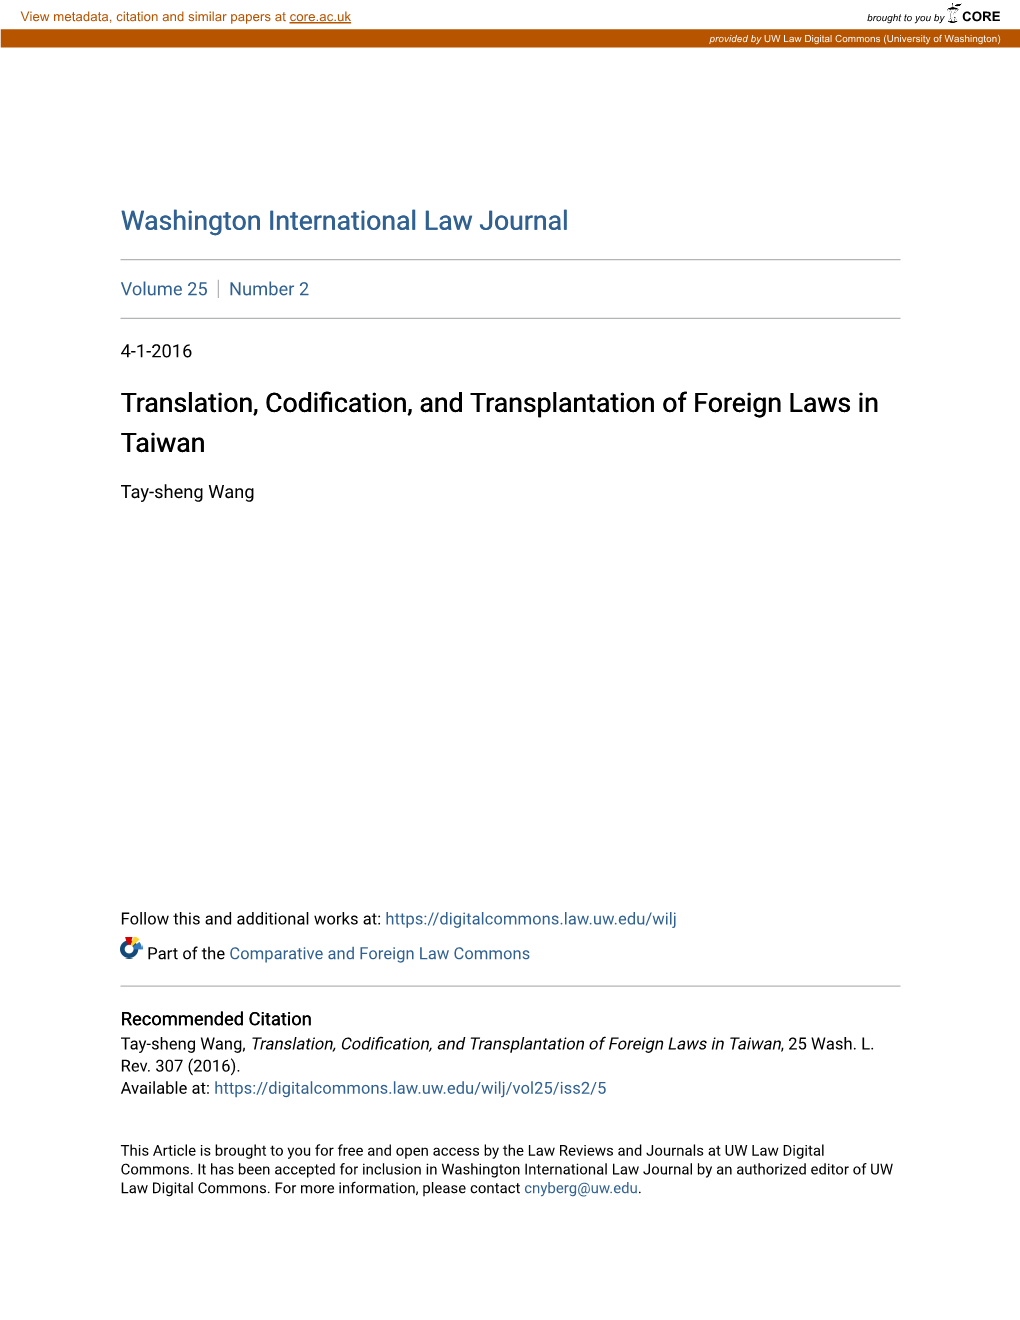 Translation, Codification, and Transplantation of Foreign Laws in Taiwan